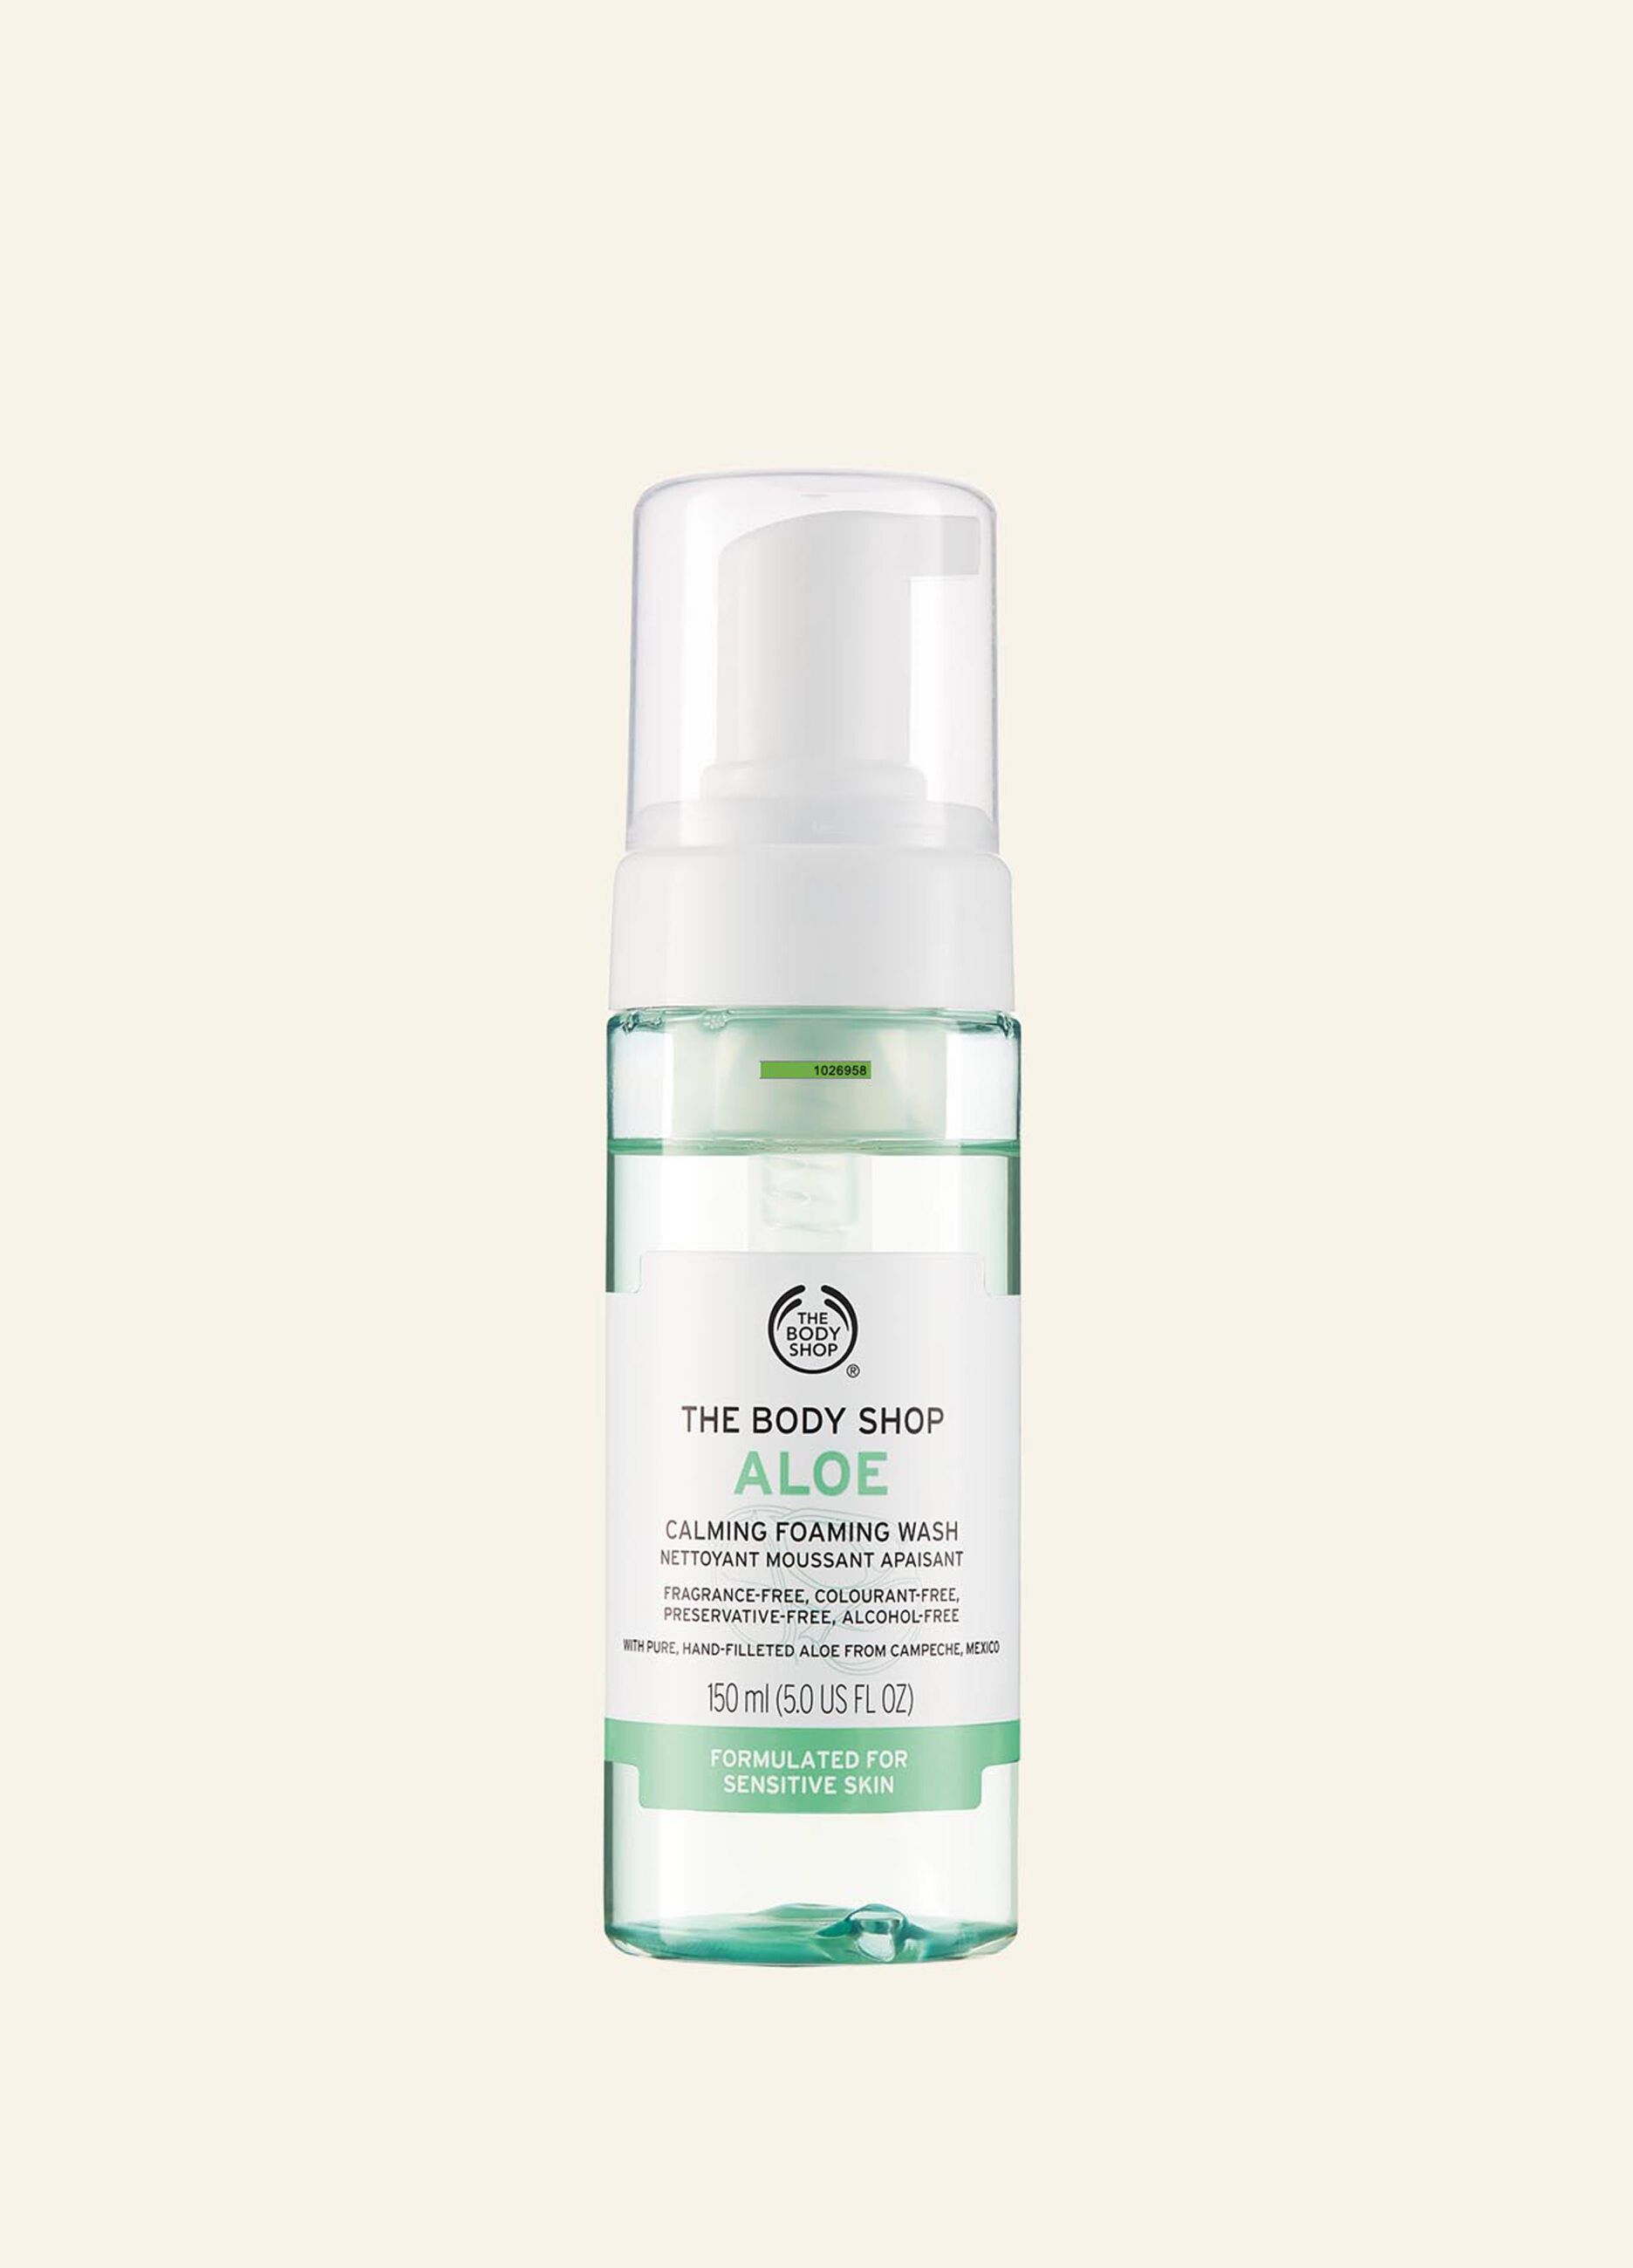 The Body Shop facial cleansing foam with aloe 150ml